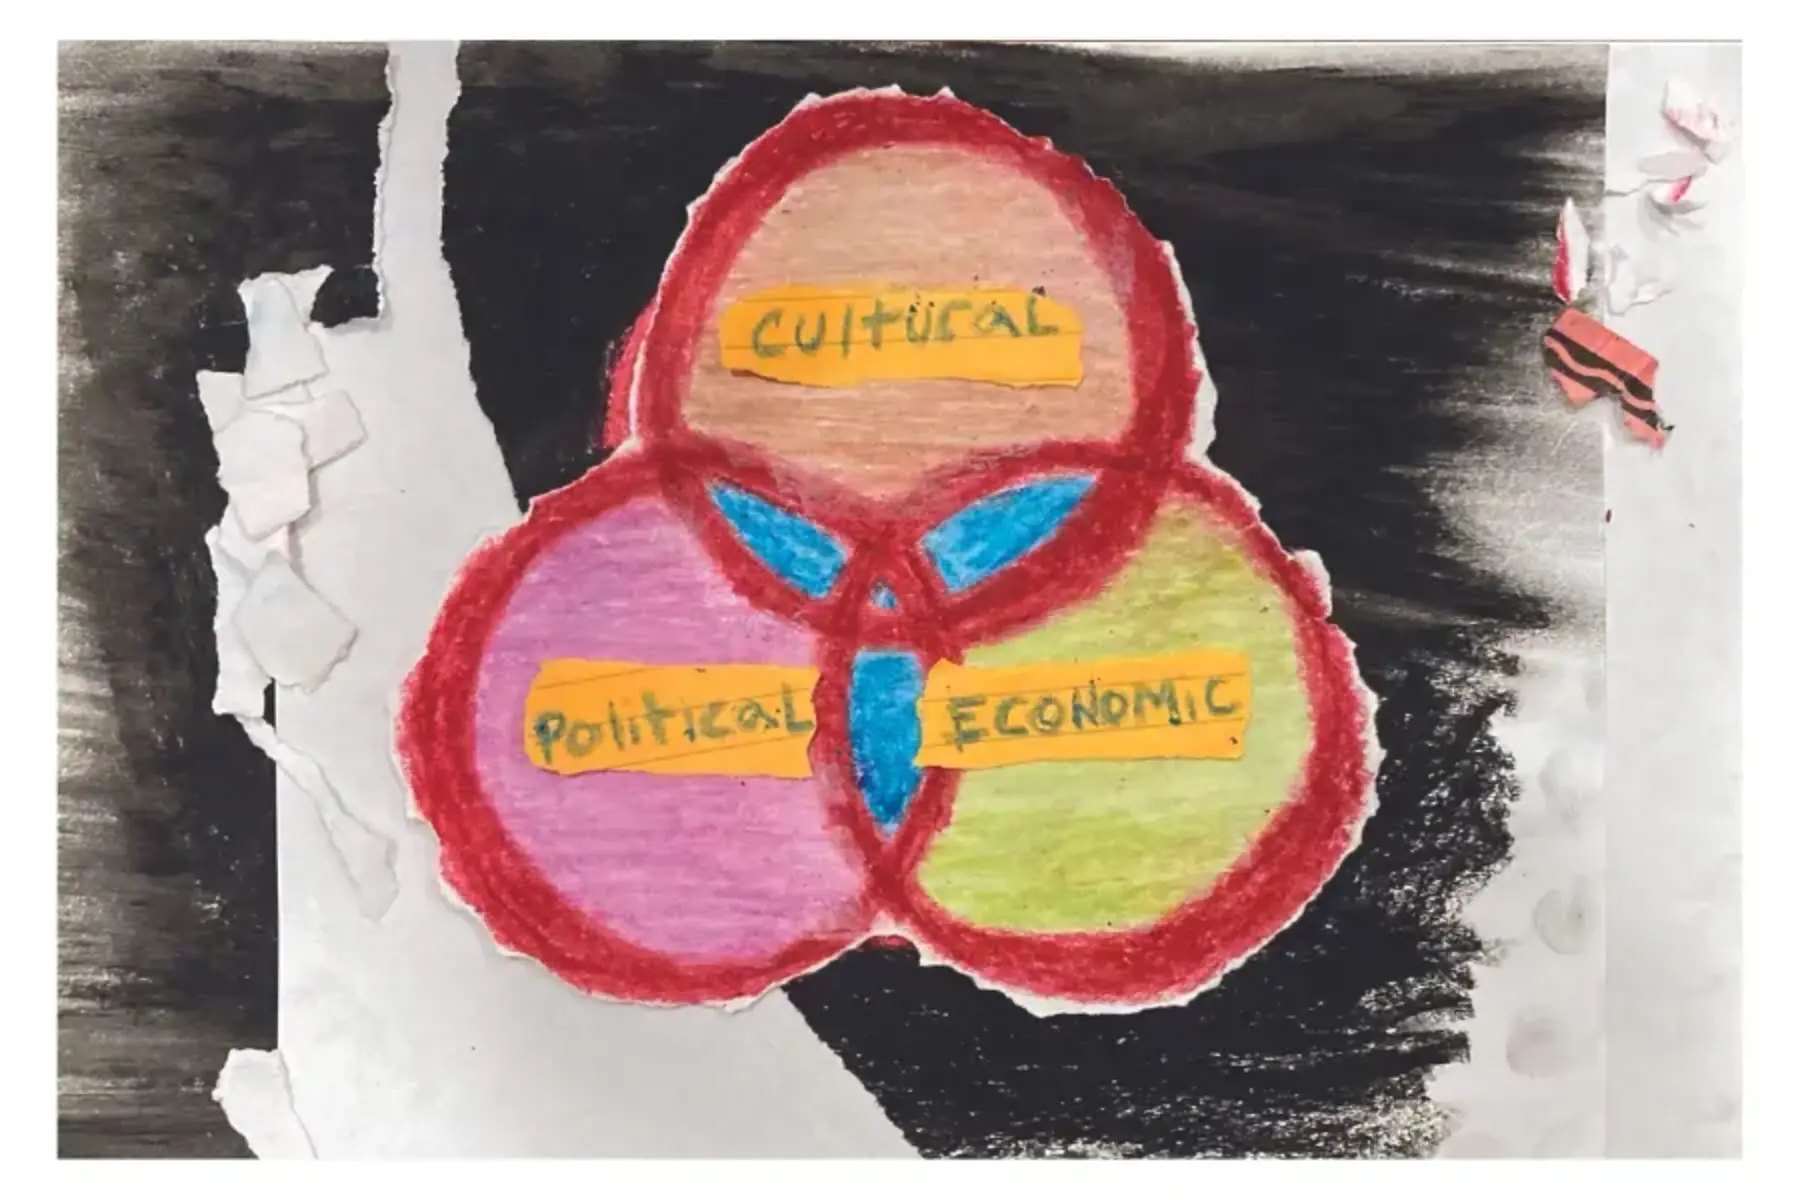 A drawing in crayon or colored pencils. The background is black and gray with a vertical tear with three circles overlapping like a venn diagram. The top circle has a red outline and orange coloring. The word cultural is written on a torn piece of neon orange lined stickie note. The bottom right circle has a red outline and yellow coloring. The word economic is written on a torn piece of neon orange lined stickie note. The bottom left circle has a red outline and pink coloring. The word political is written on a torn piece of neon orange lined stickie note. The spaces that overlap among the circles are colored blue.